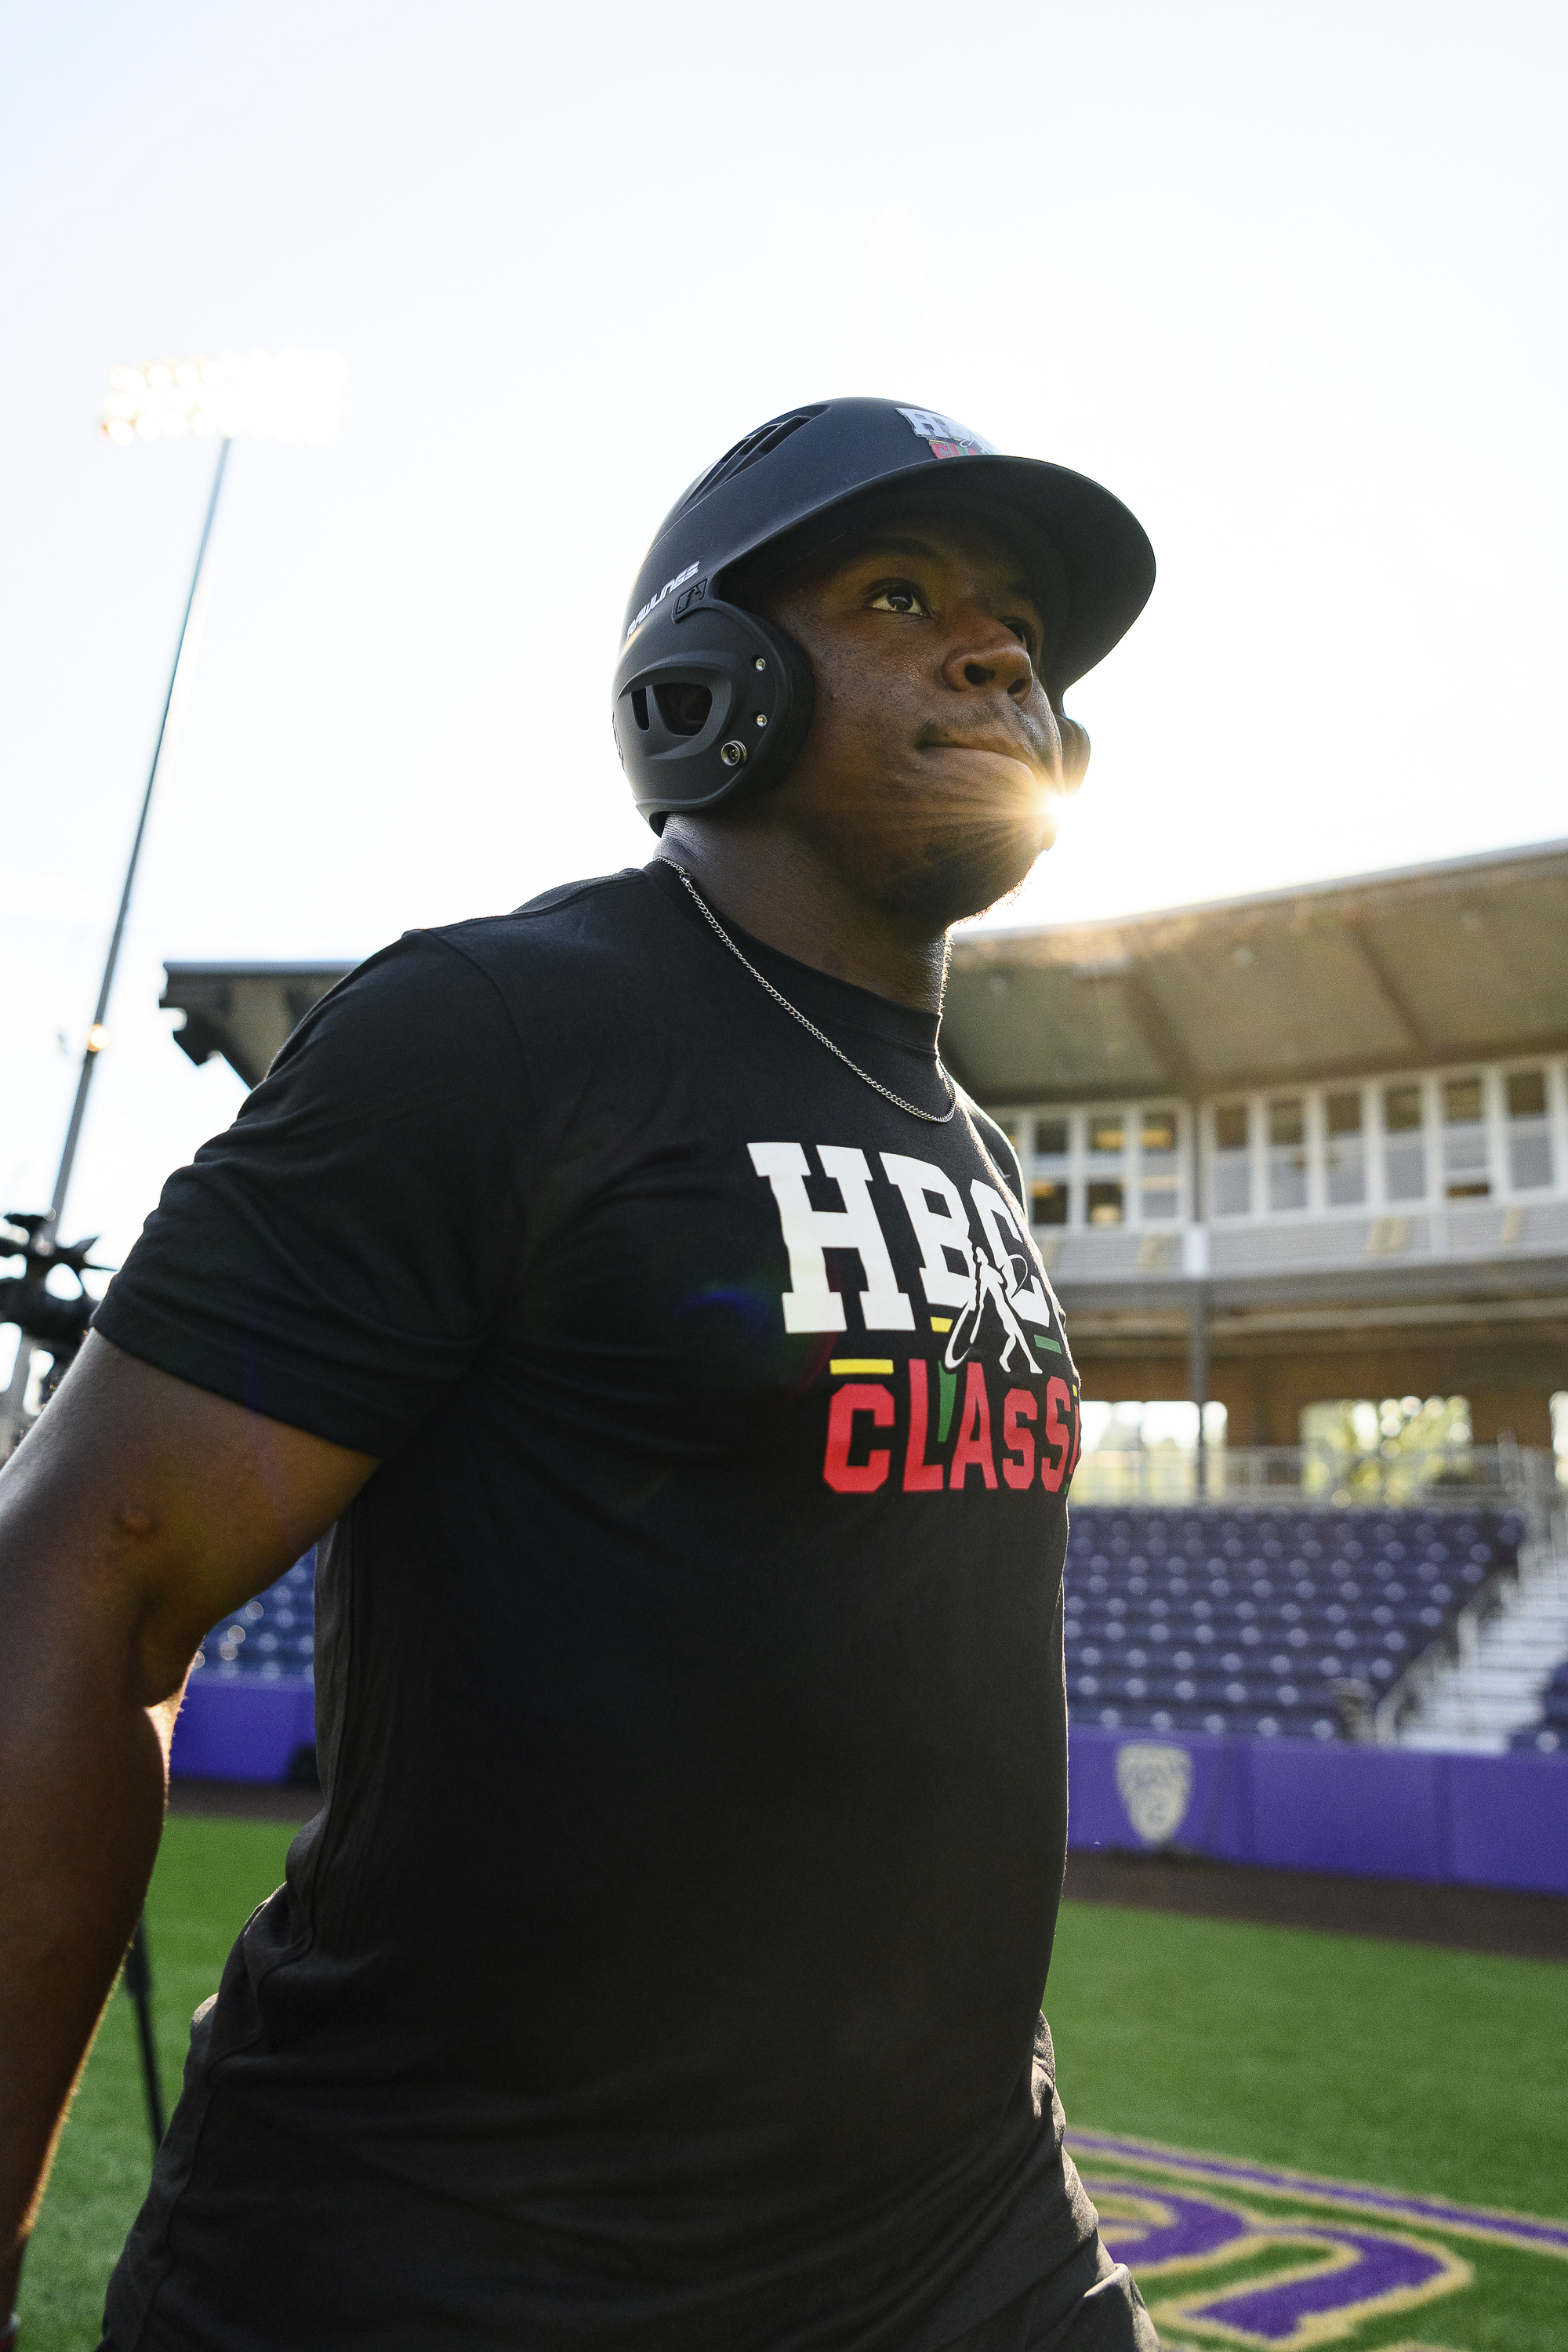 With Ken Griffey Jr.'s help, MLB hosts HBCU All-Star Game hoping to create  opportunity for Black players – News-Herald